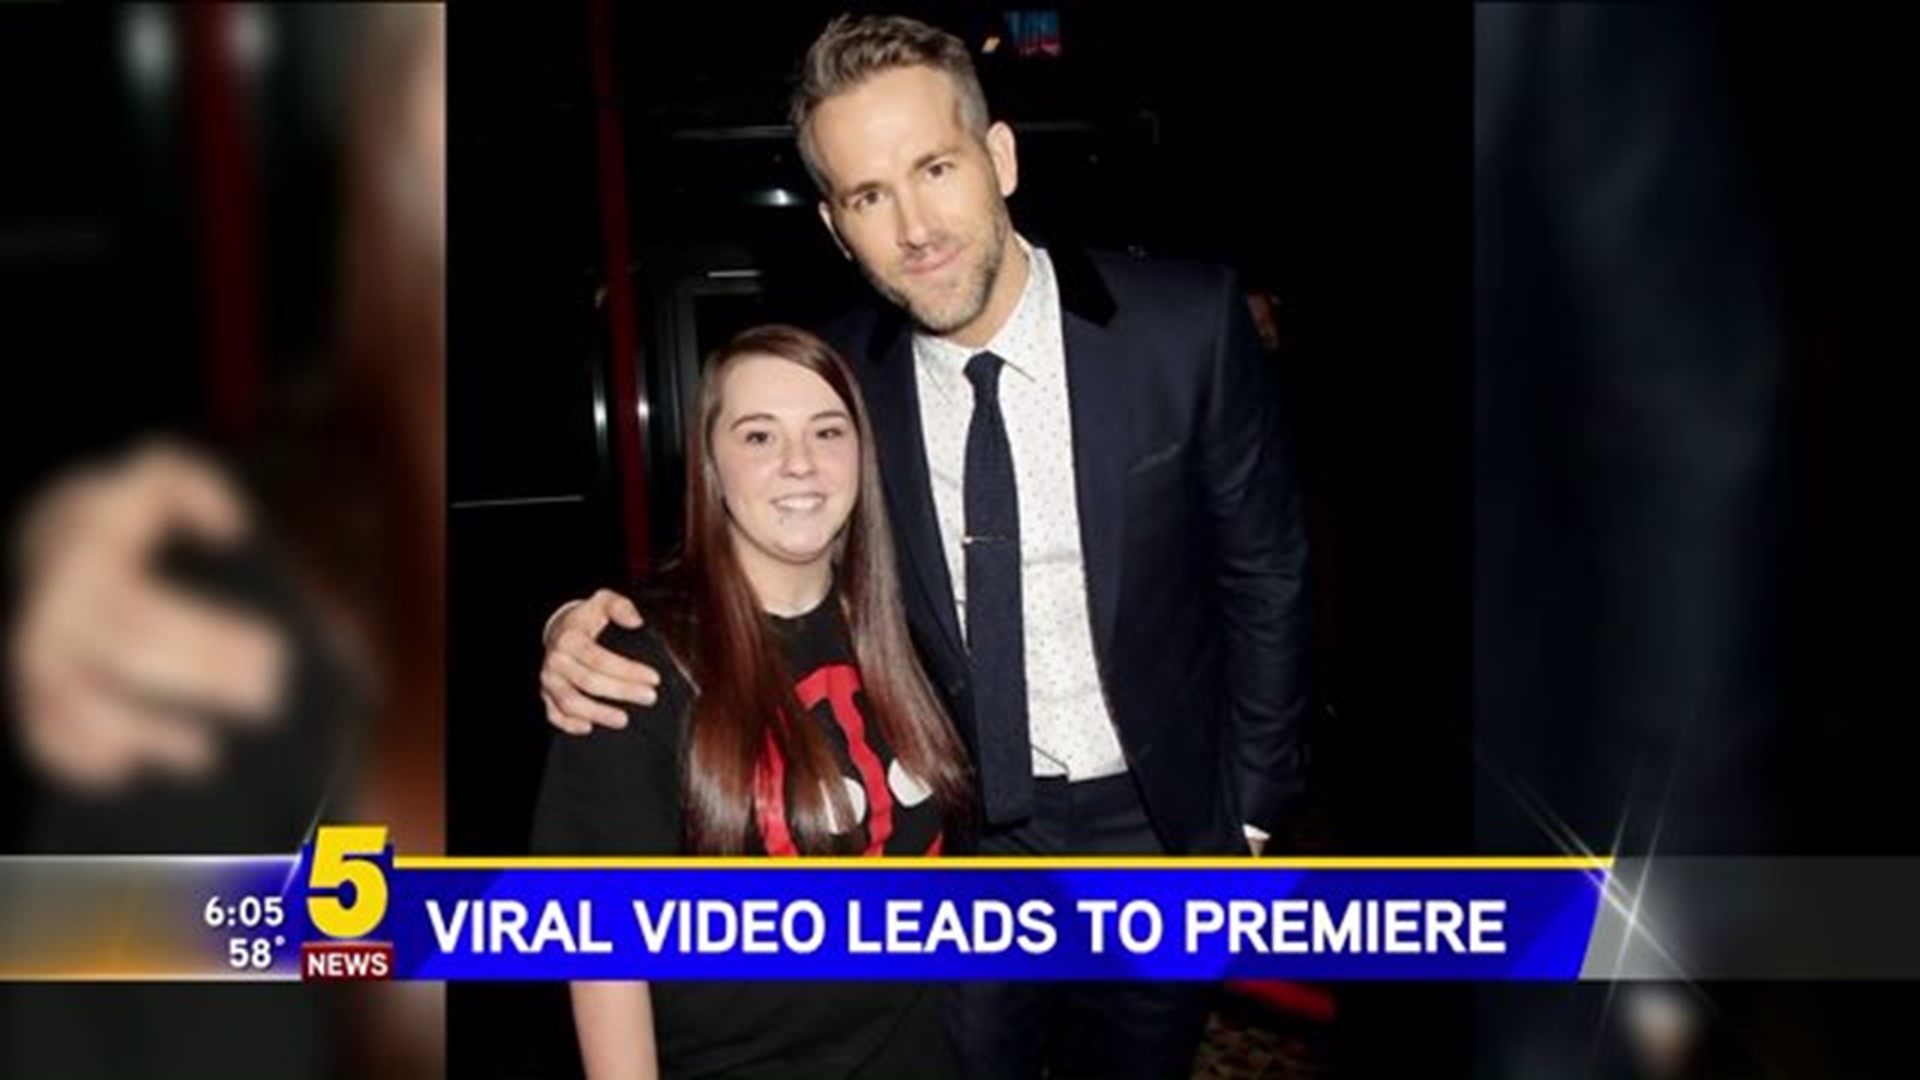 Local Girl Meets Movie Star After Video Goes Viral